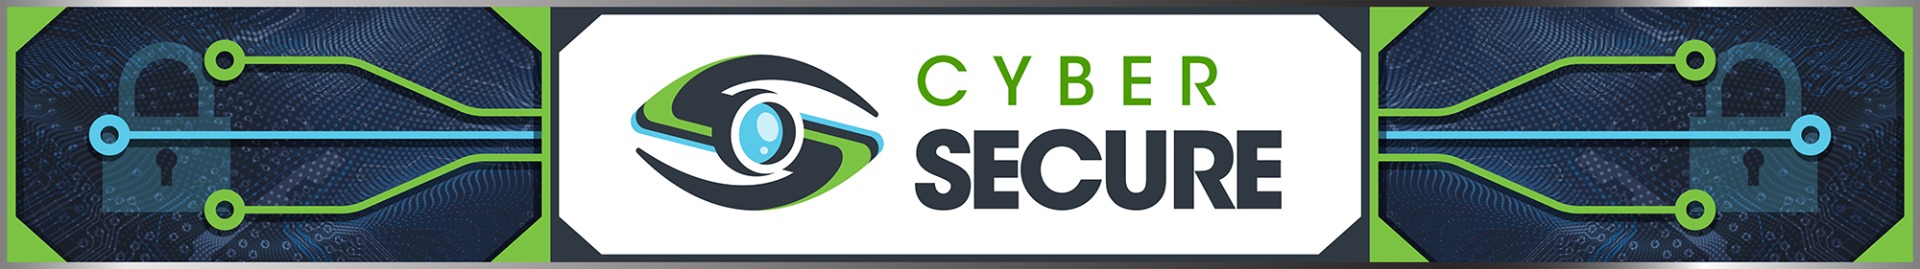 Cyber-Secure How-to Videos